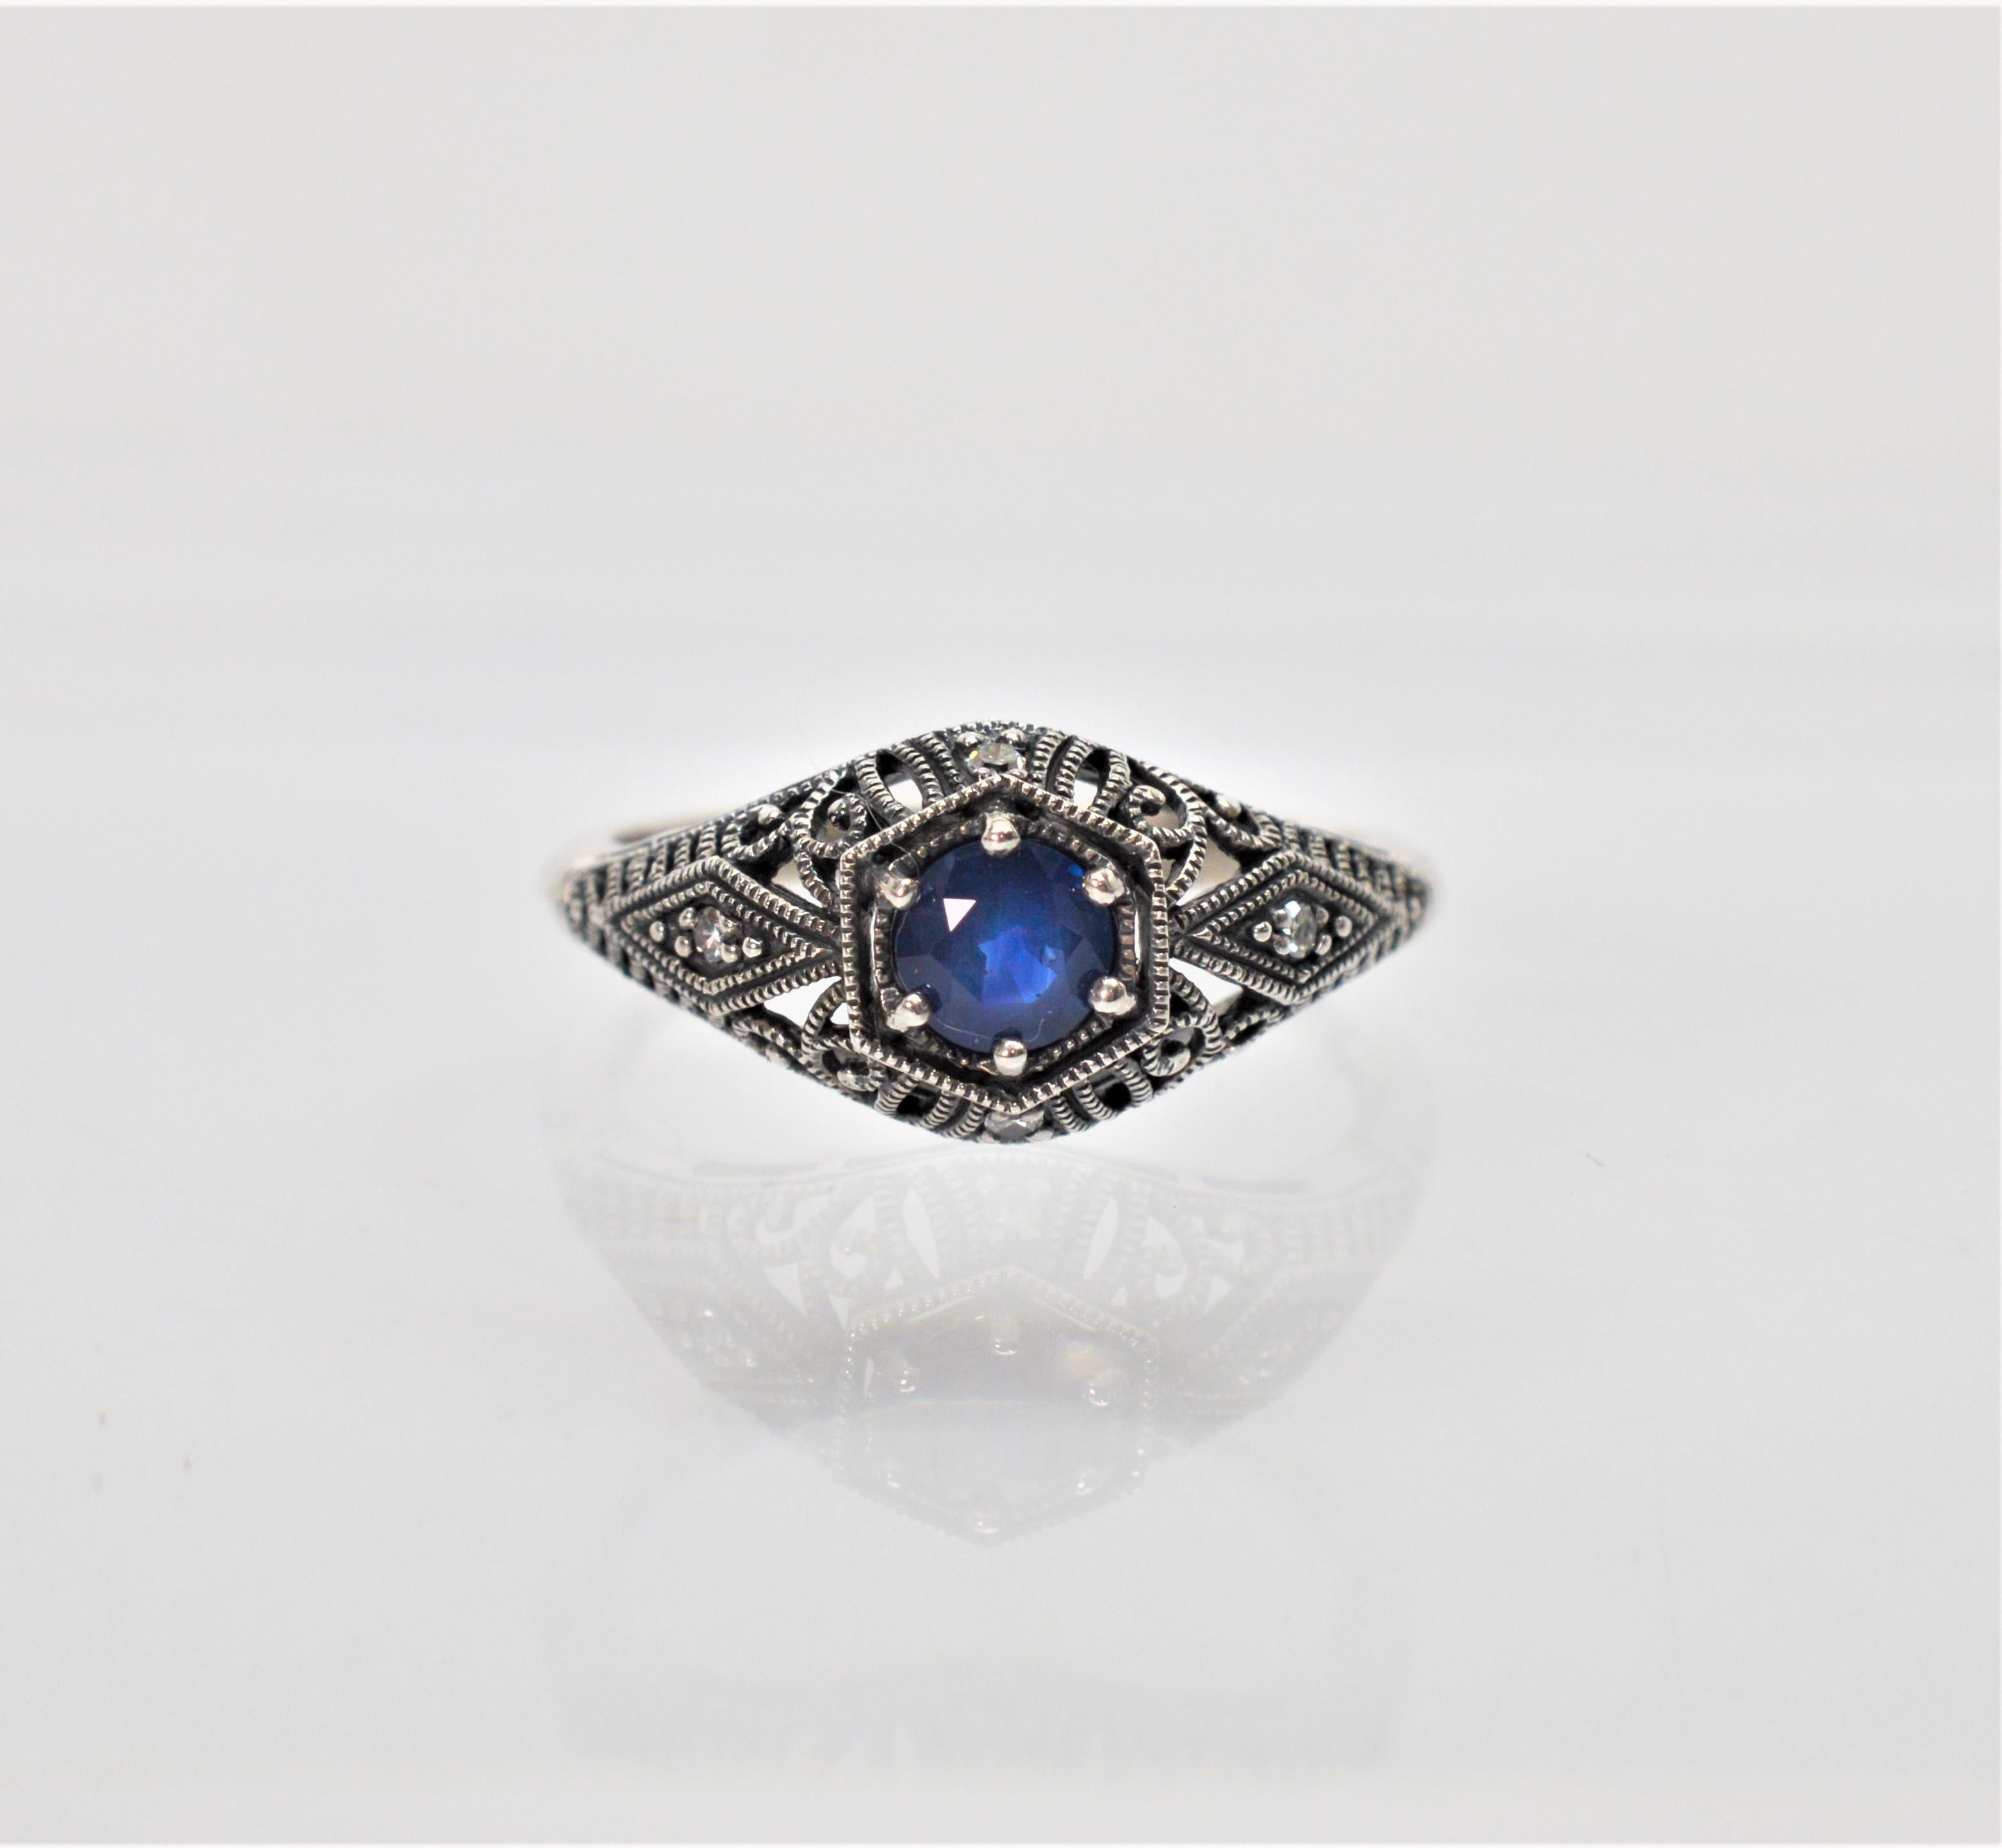 Vintage inspired design in sterling silver filigree with genuine gemstones. Enjoy this timeless design with exquisite detail reminiscent of the Art Deco Period. This ring has a center .25 round faceted blue sapphire with diamond accents. Comes in